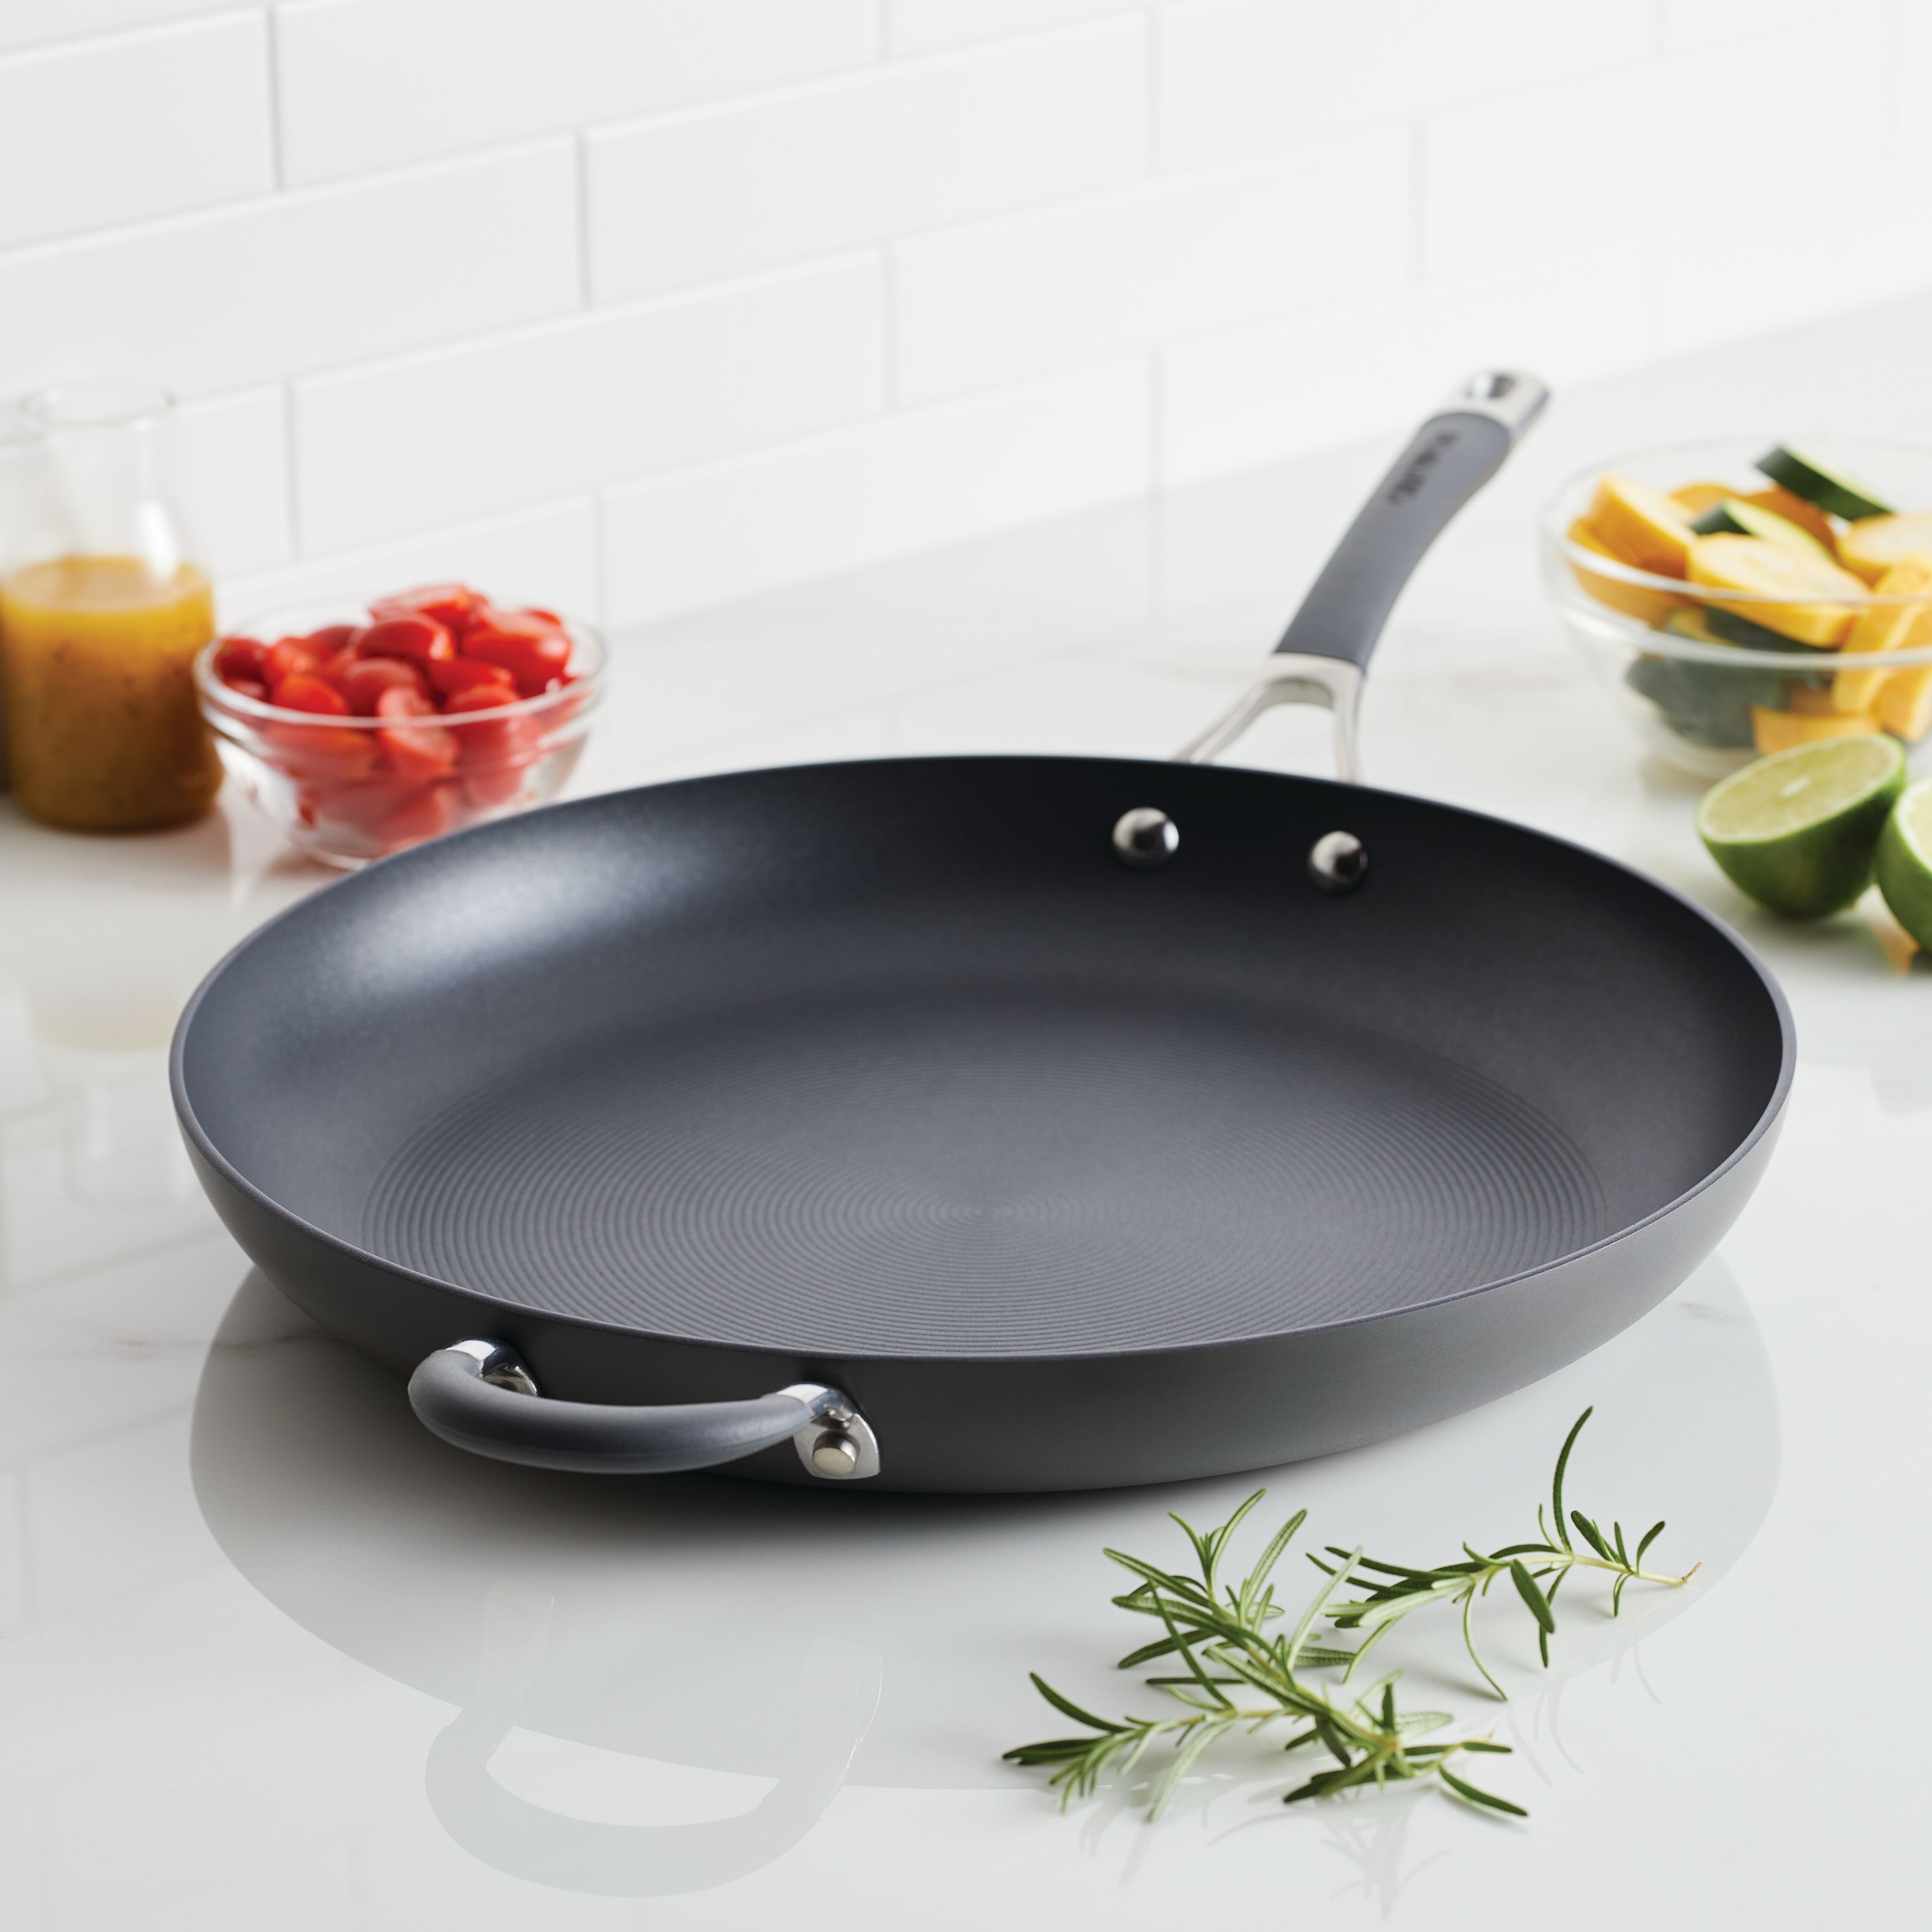 https://ak1.ostkcdn.com/images/products/is/images/direct/28a4c79a8f5793d418f50c96d5e753963f271f2d/Circulon-Radiance-Hard-Anodized-Nonstick-Frying-Pan-with-Helper-Handle%2C-14-Inch%2C-Gray.jpg